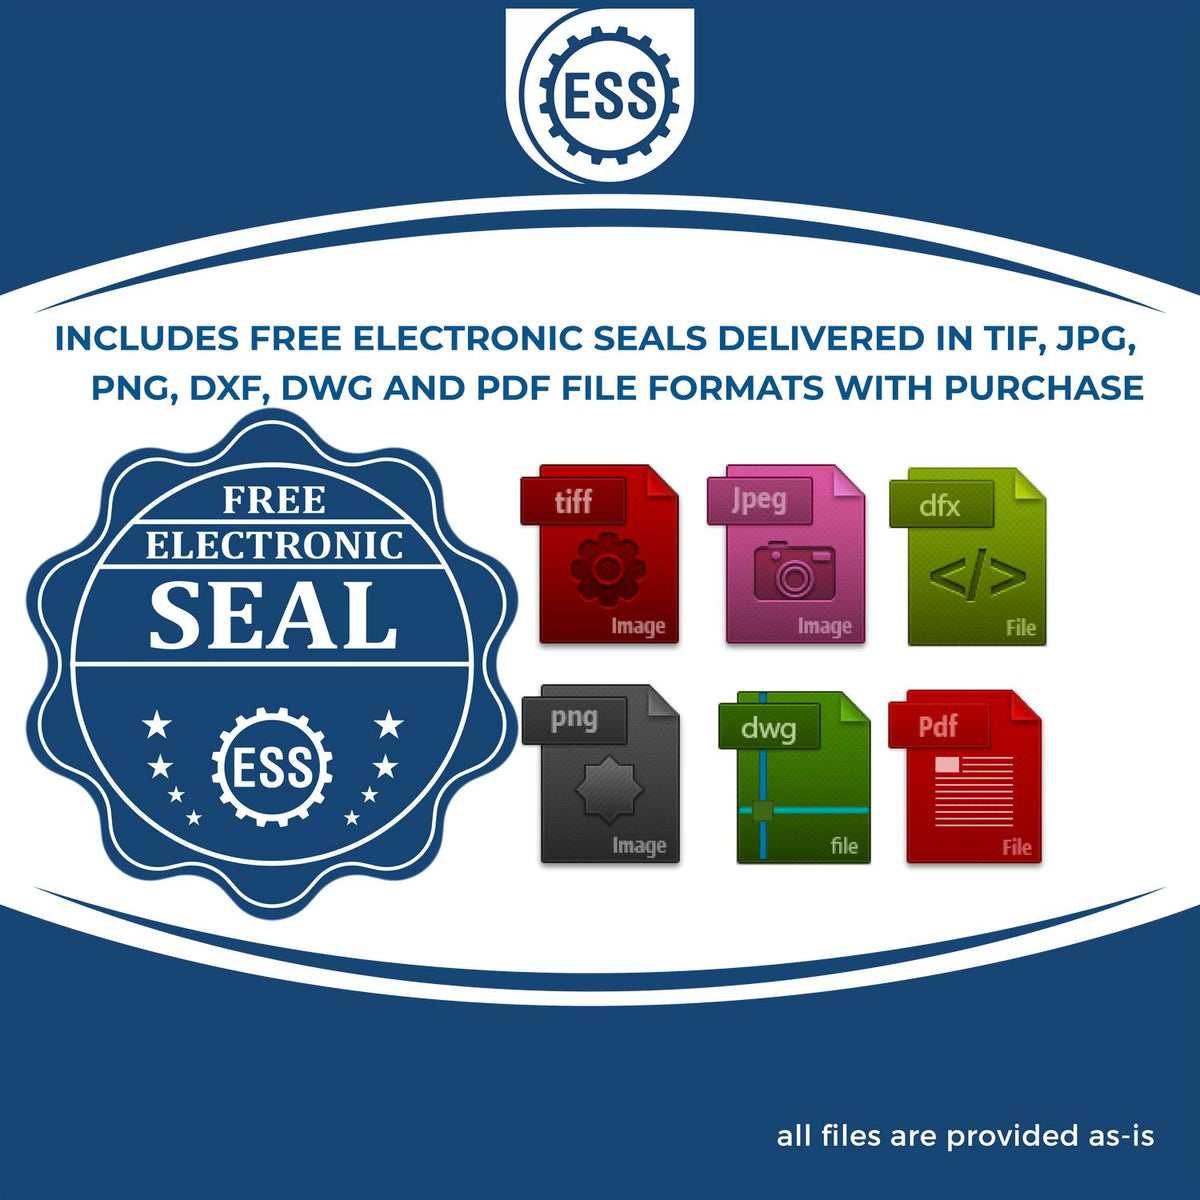 An infographic for the free electronic seal for the MaxLight Premium Pre-Inked Montana State Seal Notarial Stamp illustrating the different file type icons such as DXF, DWG, TIF, JPG and PNG.